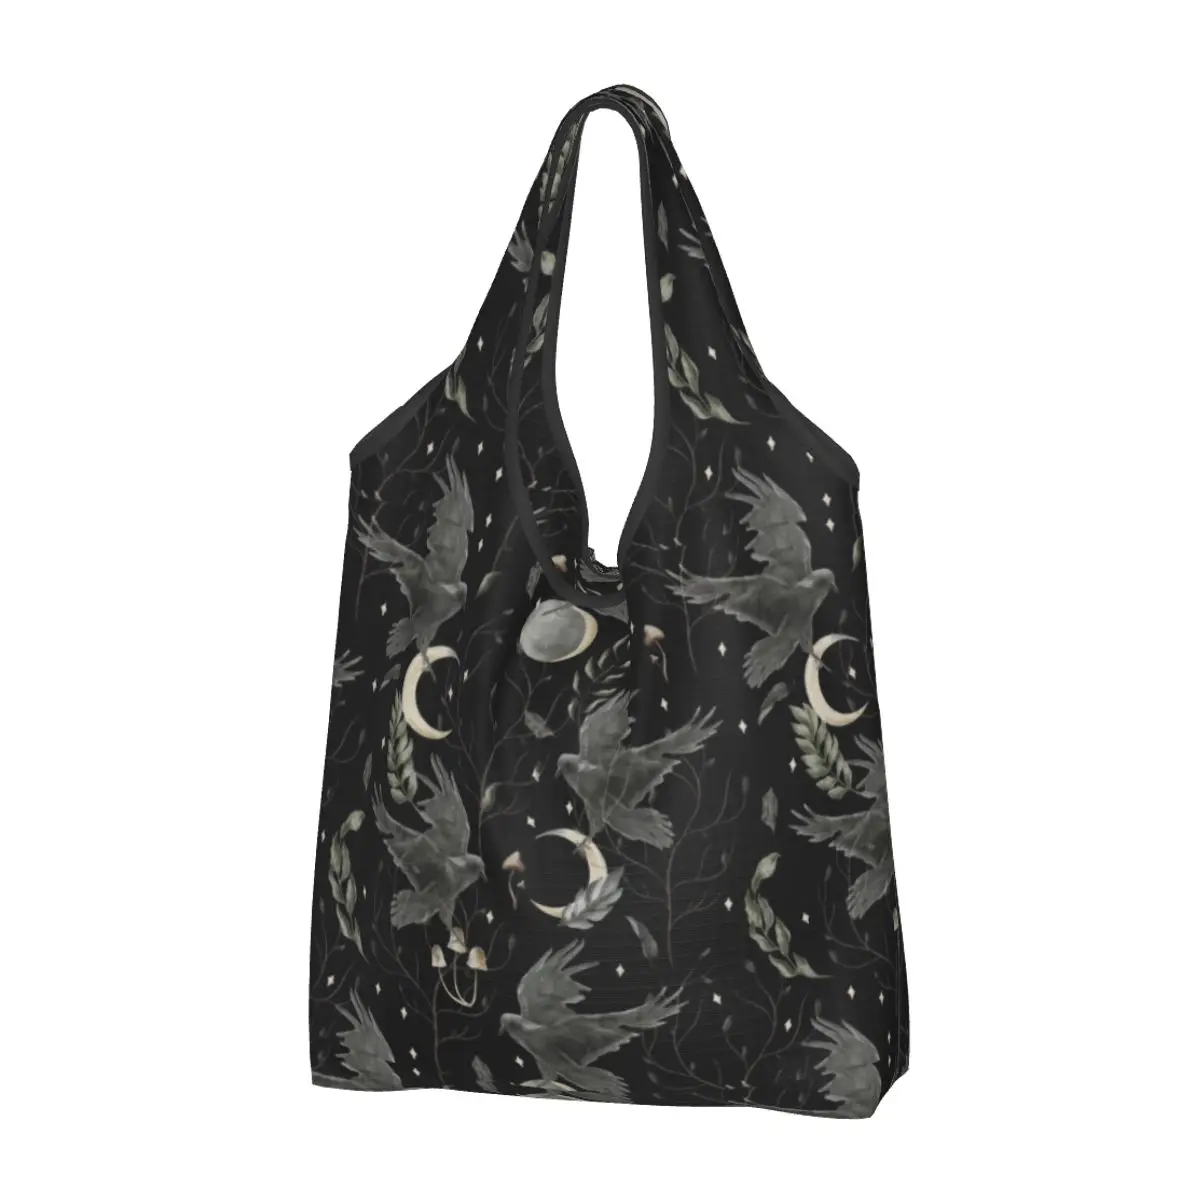 

Reusable Crow Moon Shopping Bag Women Tote Bag Portable Halloween Spooky Witch Groceries Shopper Bags